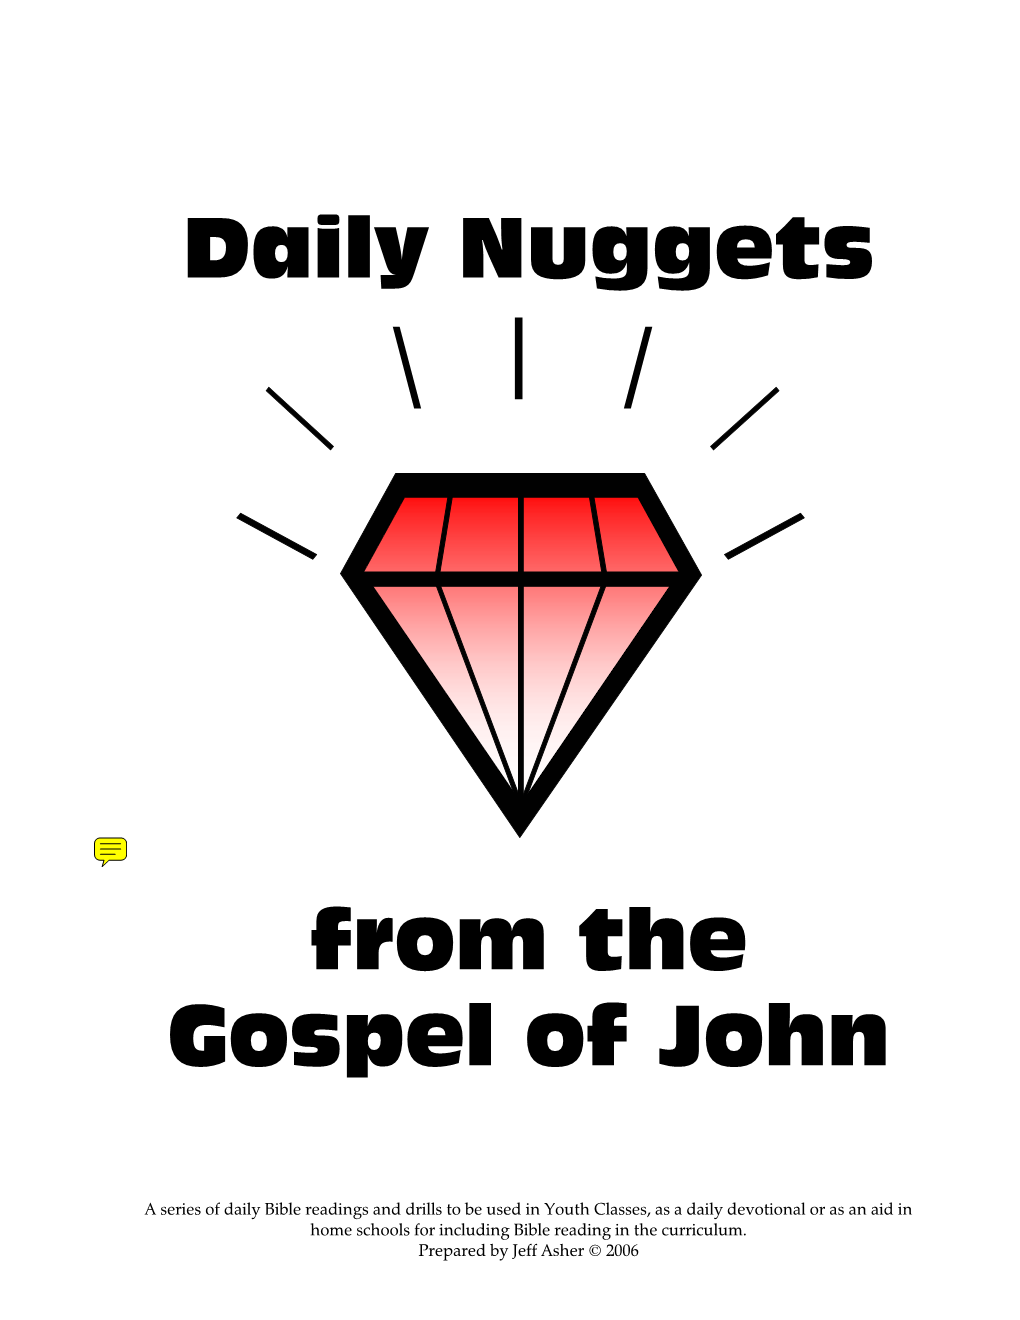 Daily Nuggets from the Gospel of John